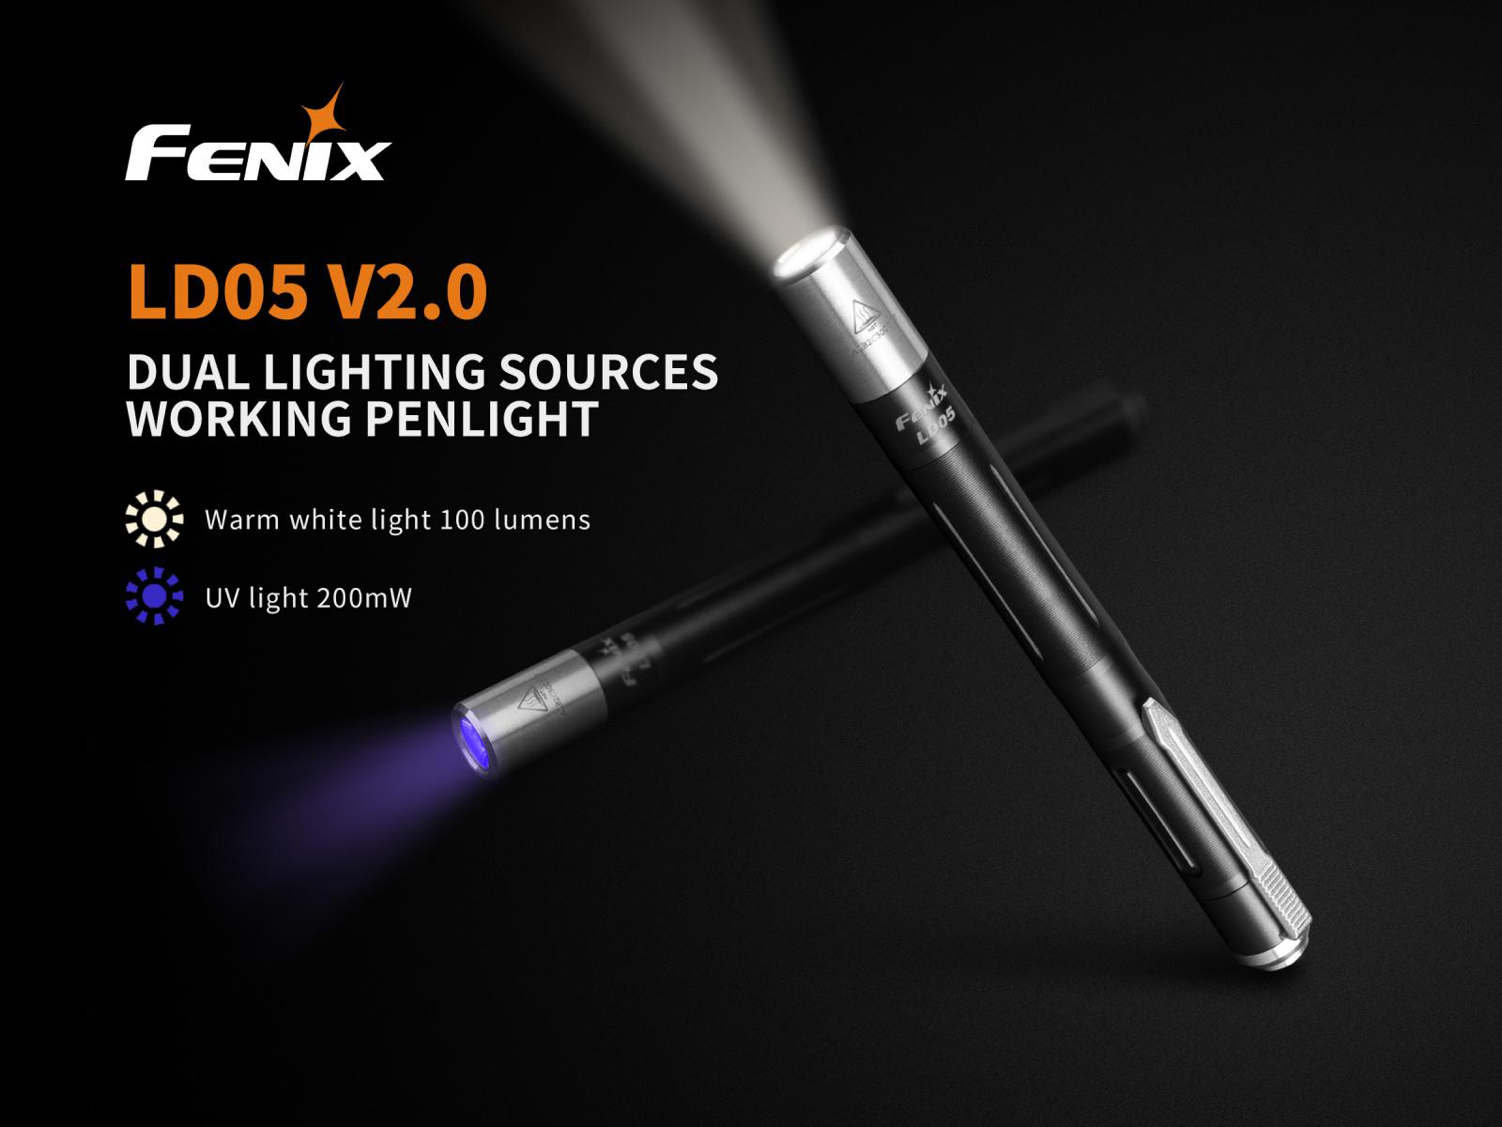 Fenix LD05 V2.0, Compact Lightweight Pen Size Torch in India, White and UV LED Pocket size Flashlight, Designed for Doctors and Work EDC Uses